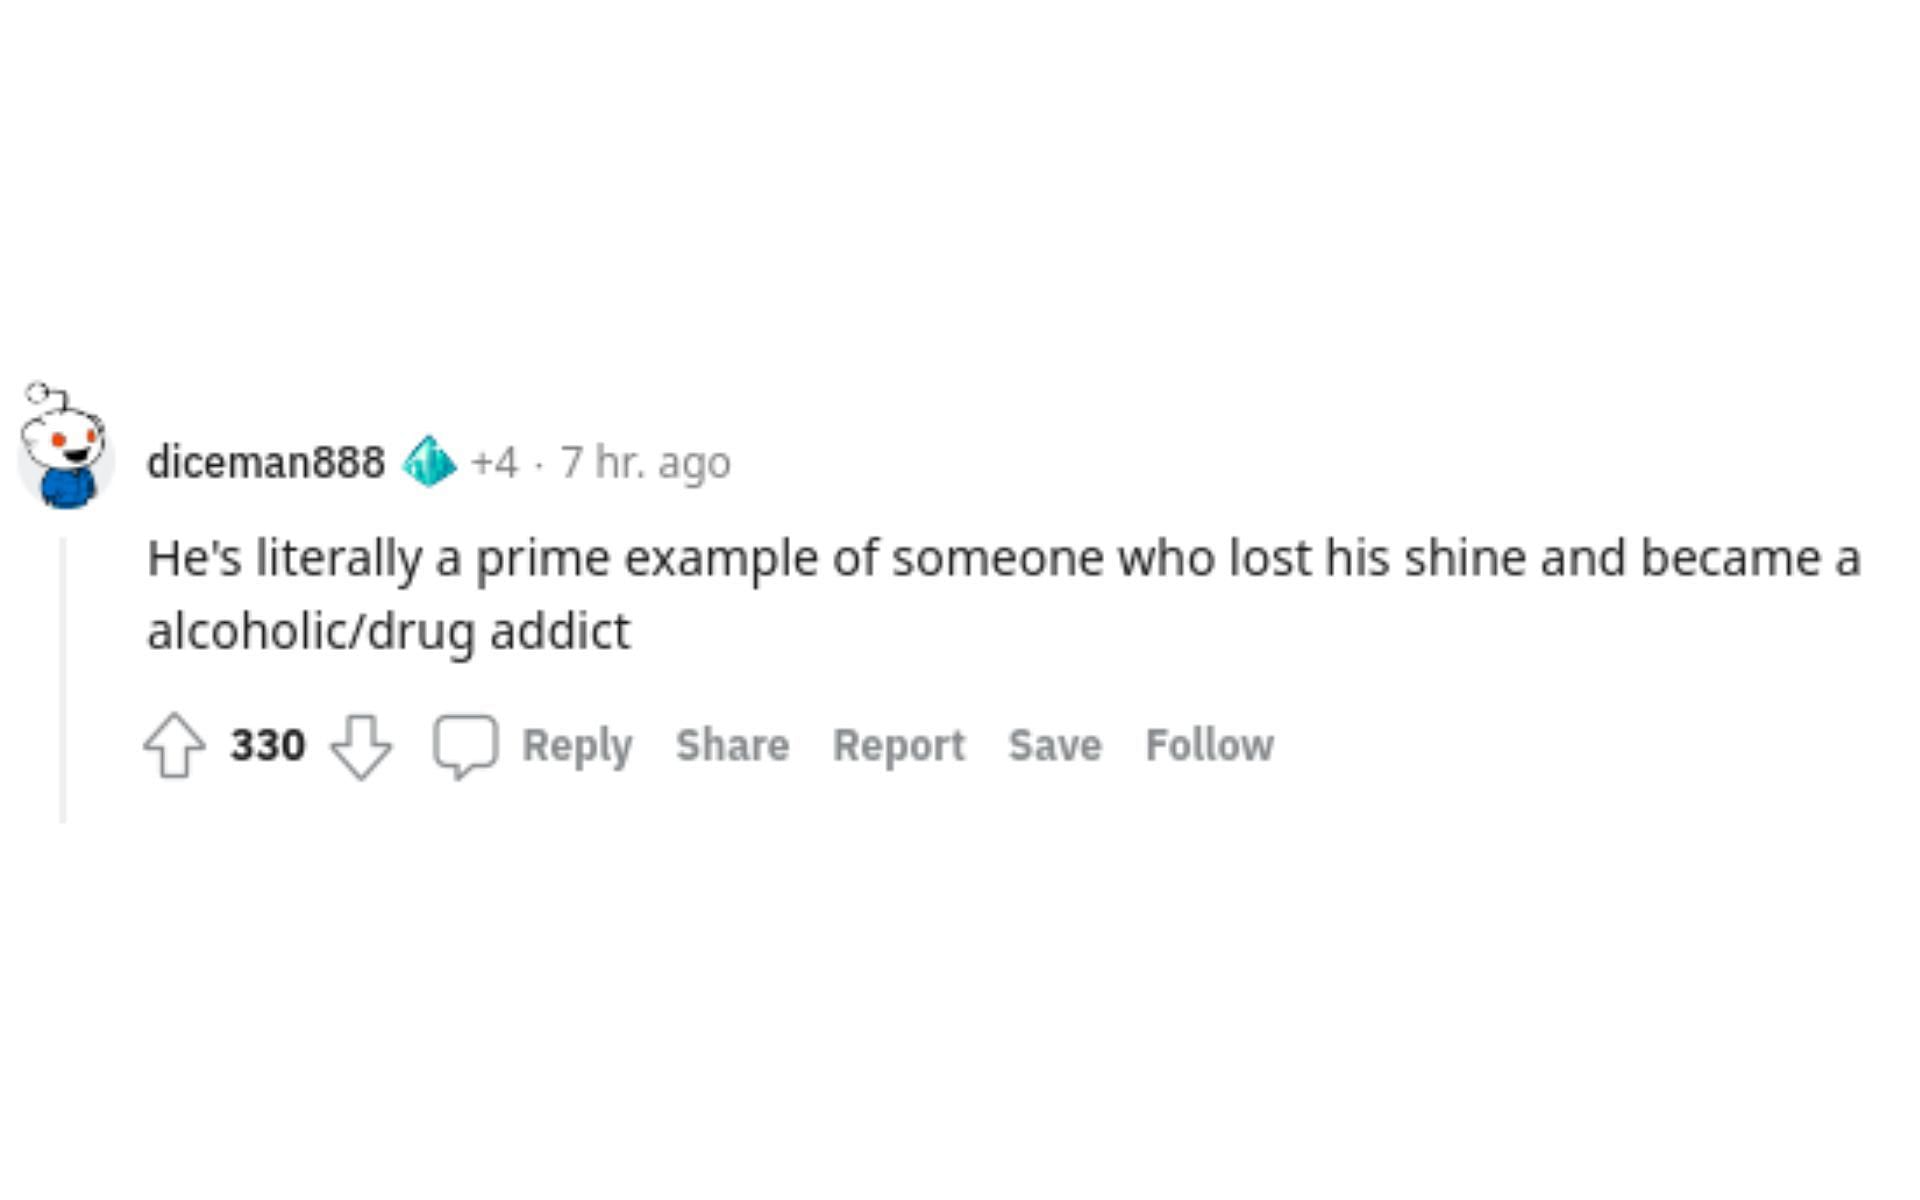 Another Reddit user's comment